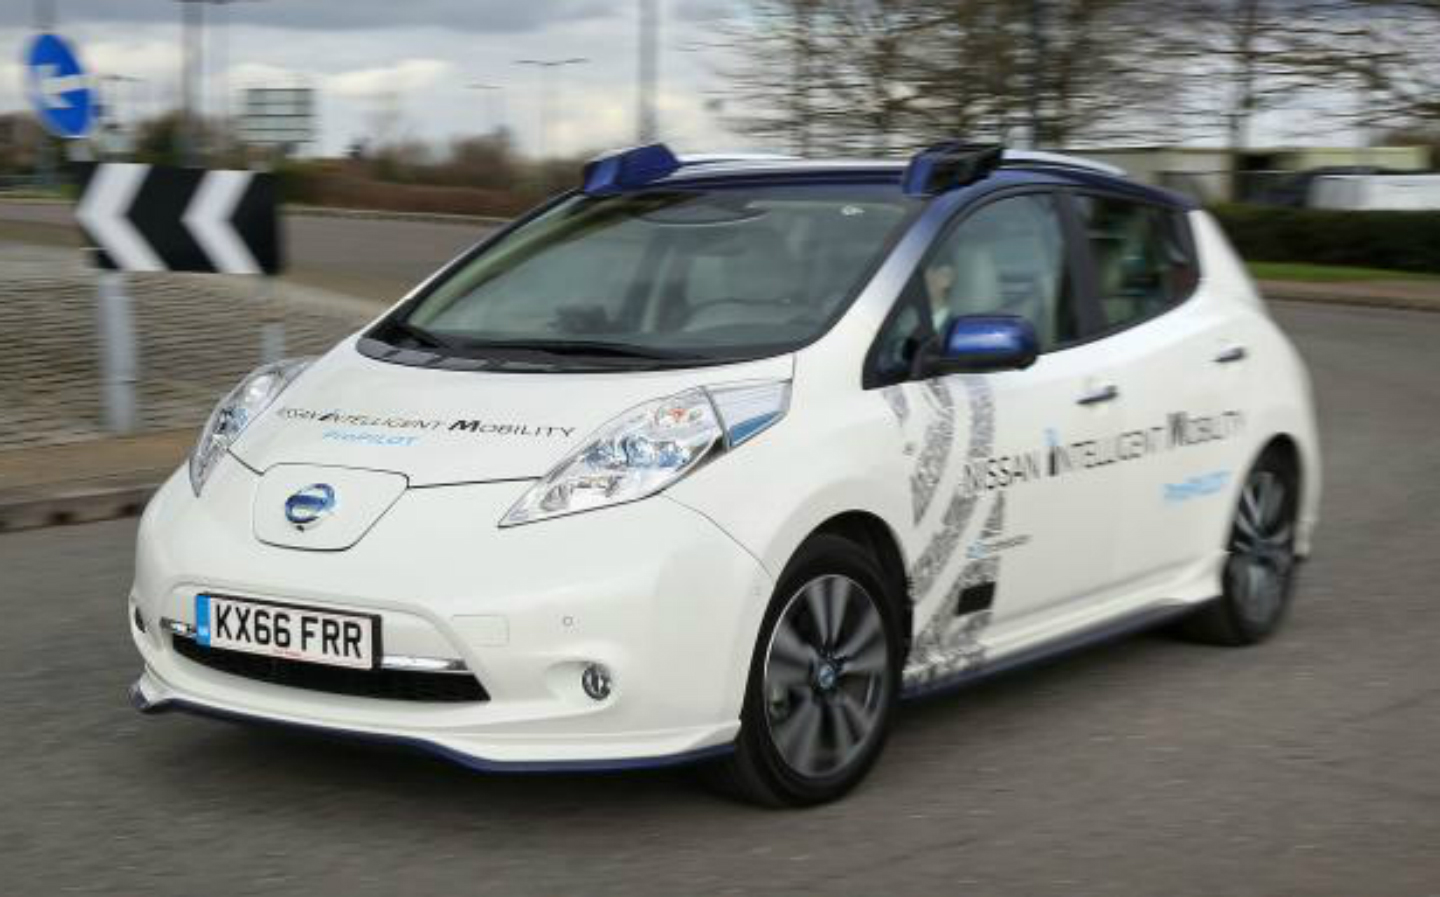 Driverless cars on UK roads this year after rules relaxed